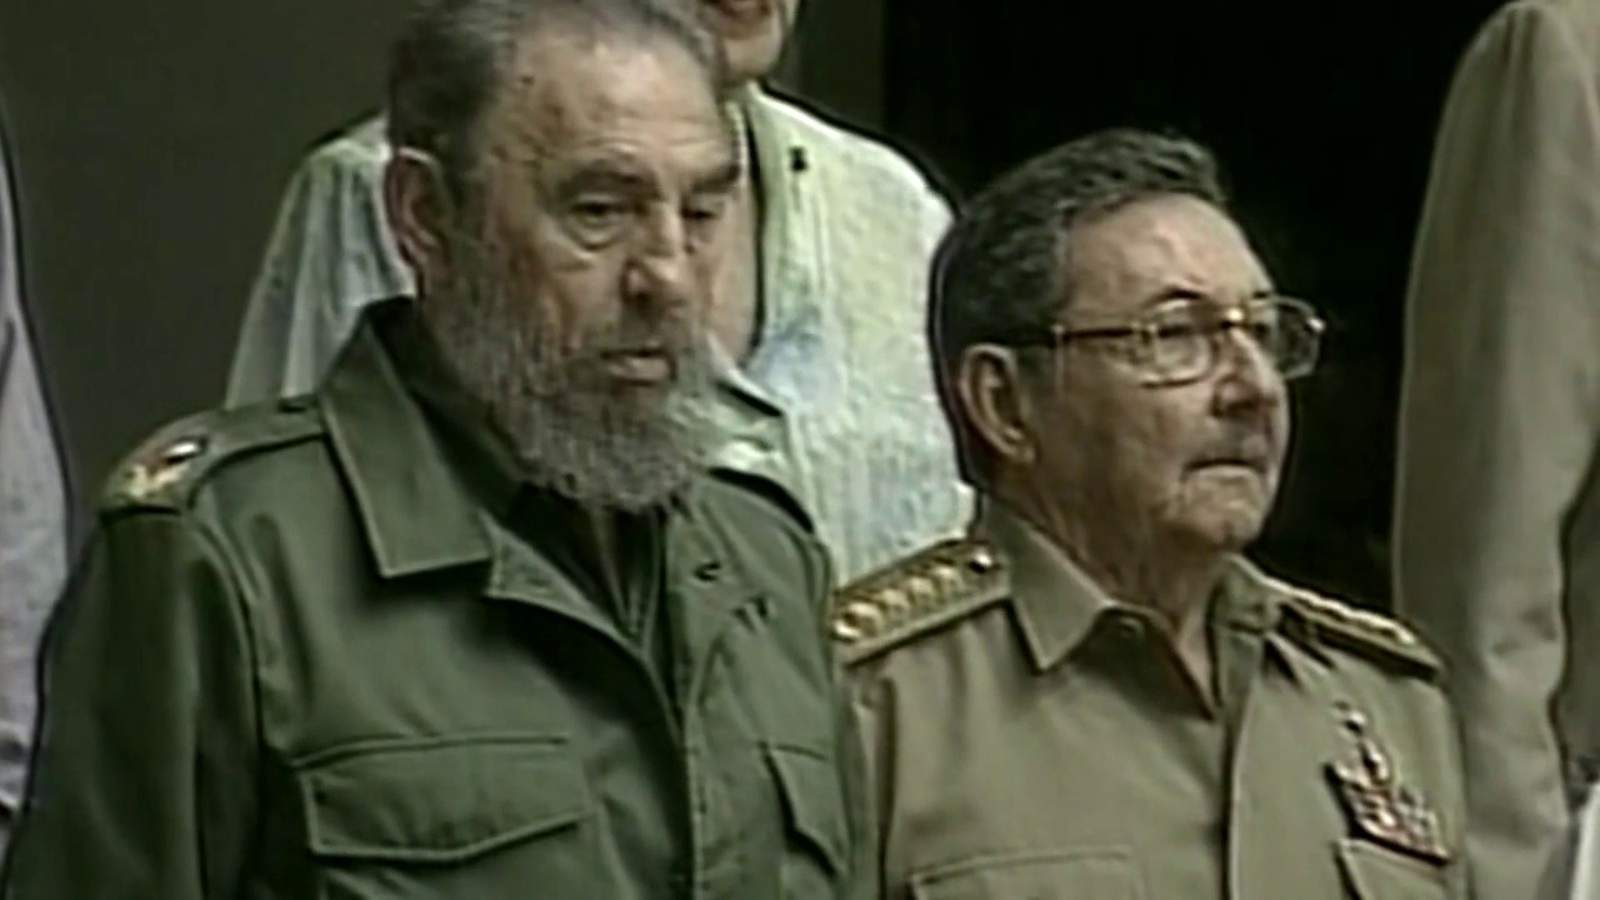 Absence of Castro brothers could test Cuba’s Communist structure, experts say